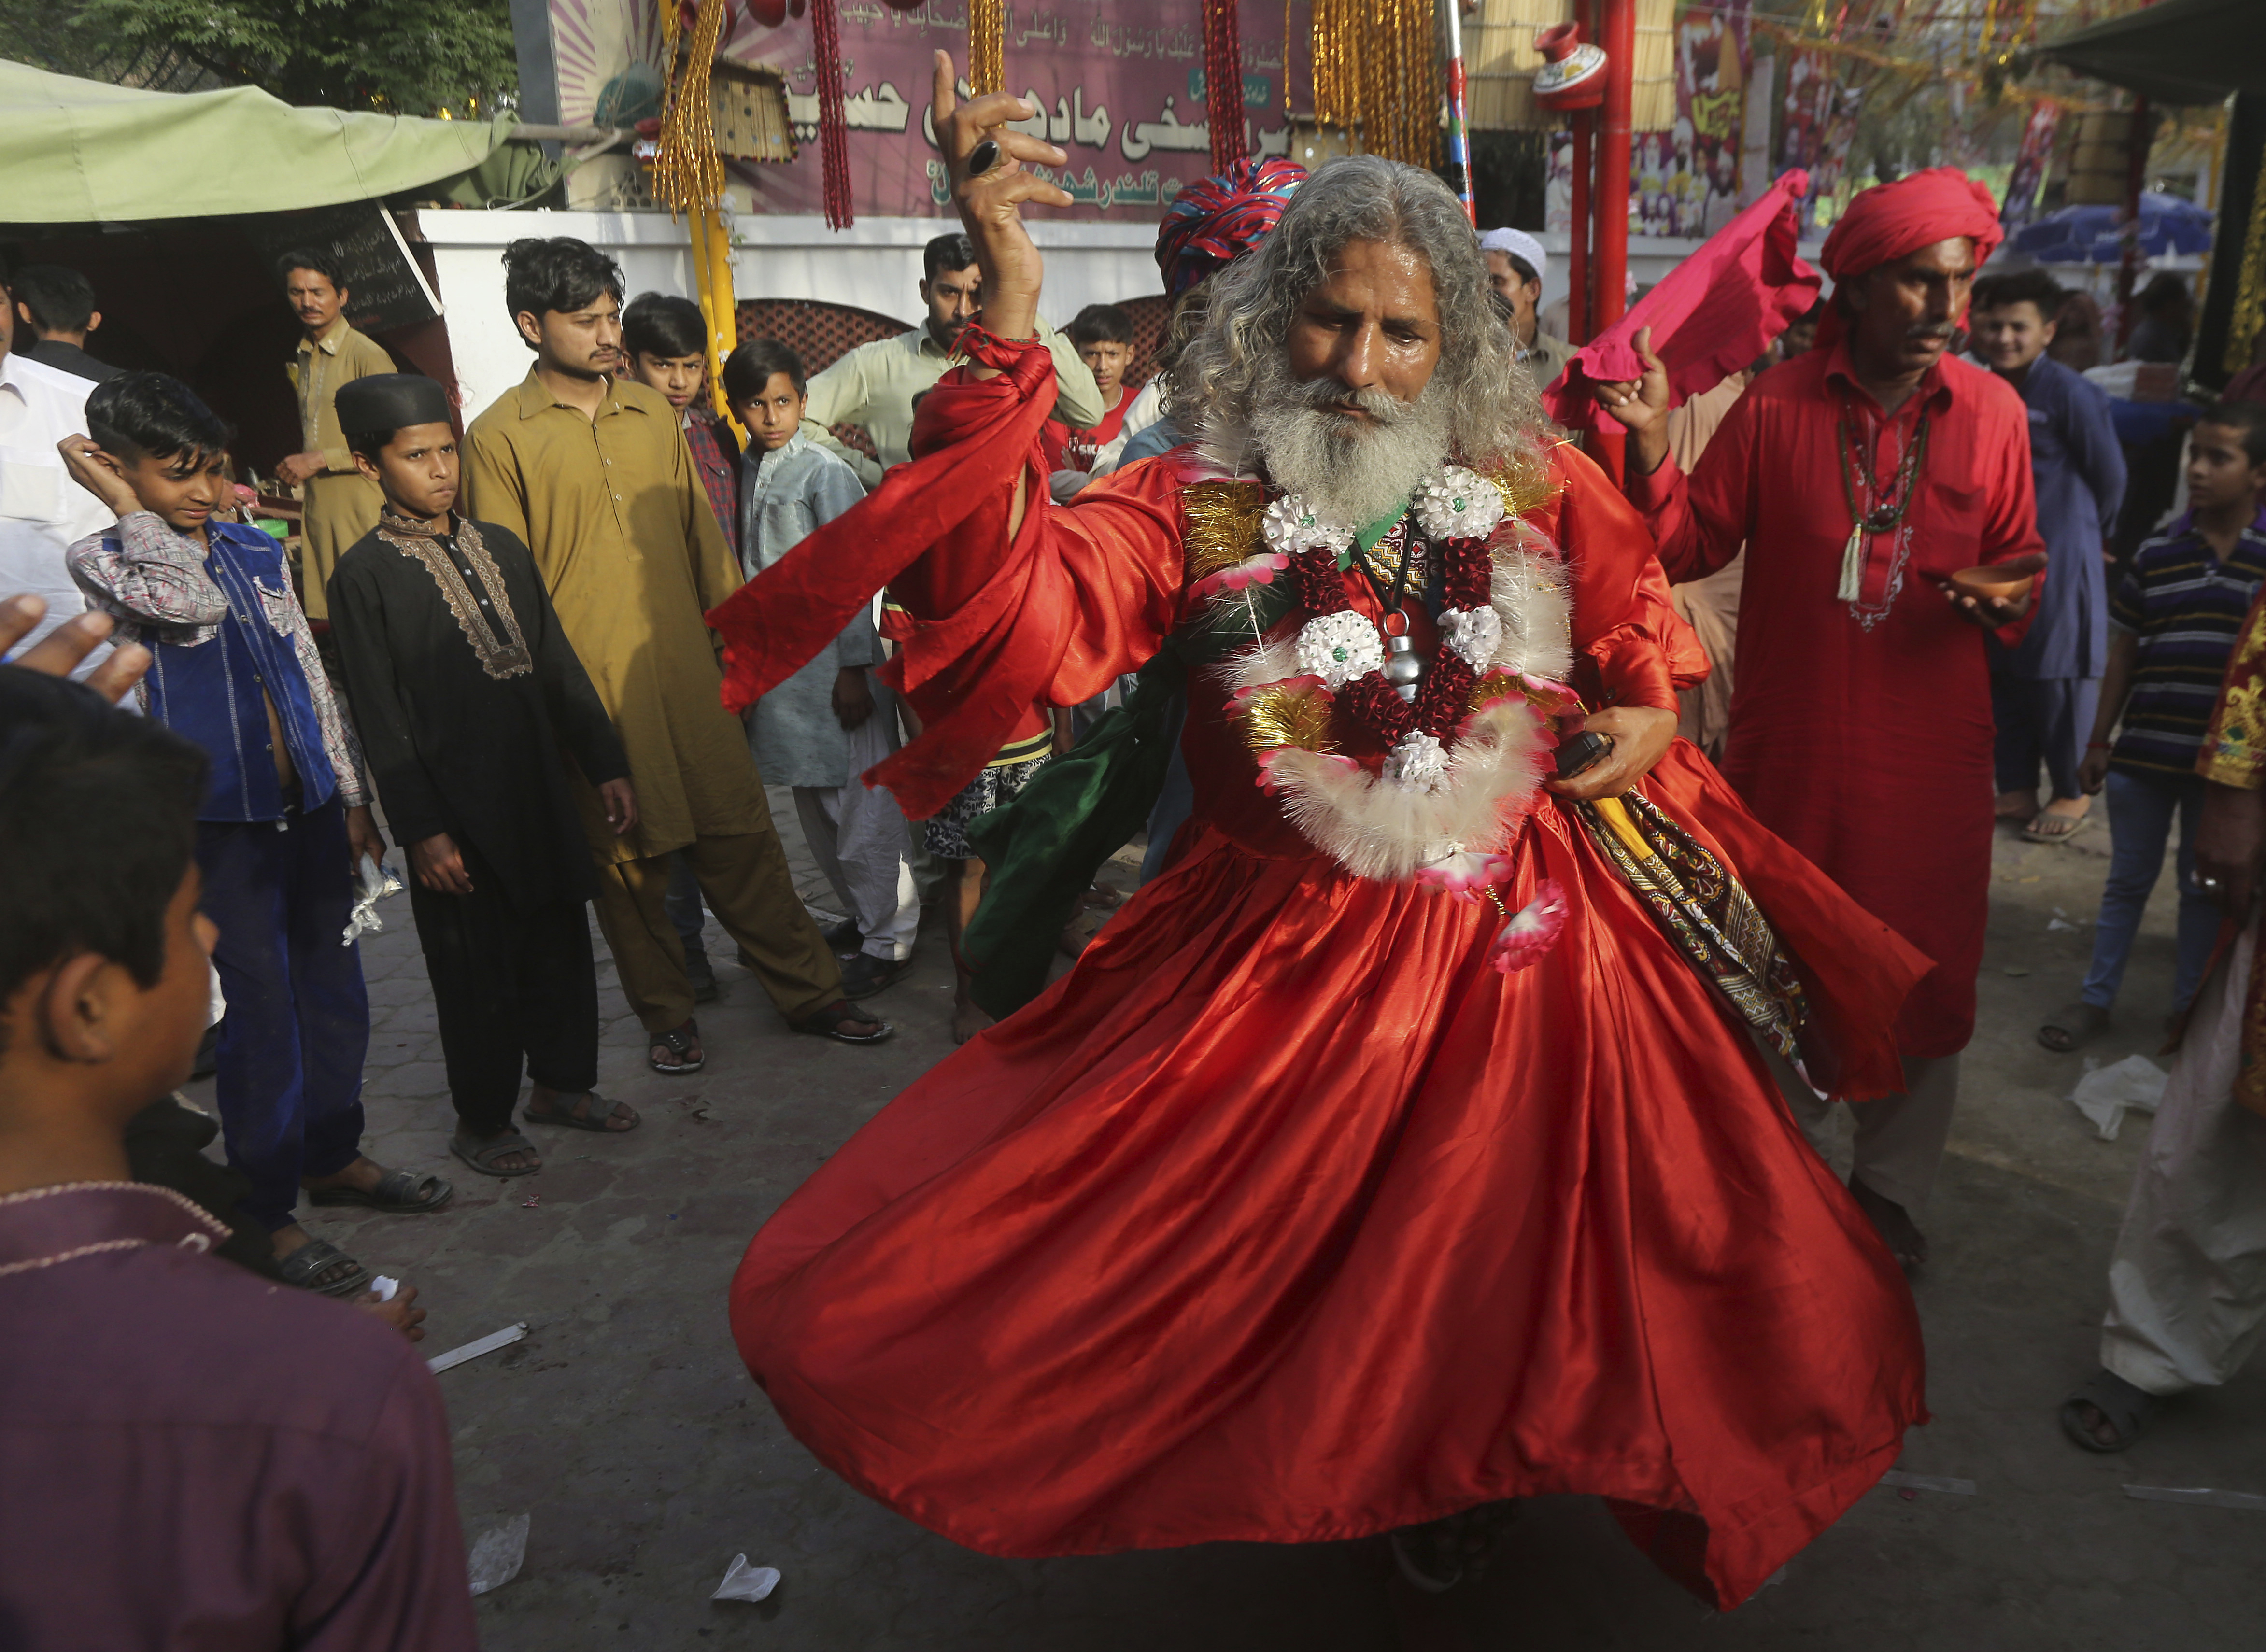 People look at a devotee dances at the shrine of Madhu Lal Shah Hussain, a poet also regarded as a Sufi saint, during an annual festival to celebrate him in Lahore, Pakistan, Friday, March 29, 2019. The annual festival to commemorate Shah Hussain (1538-1599) started with thousands of people expected to visit the shrine. (AP Photo/K.M Chaudary)